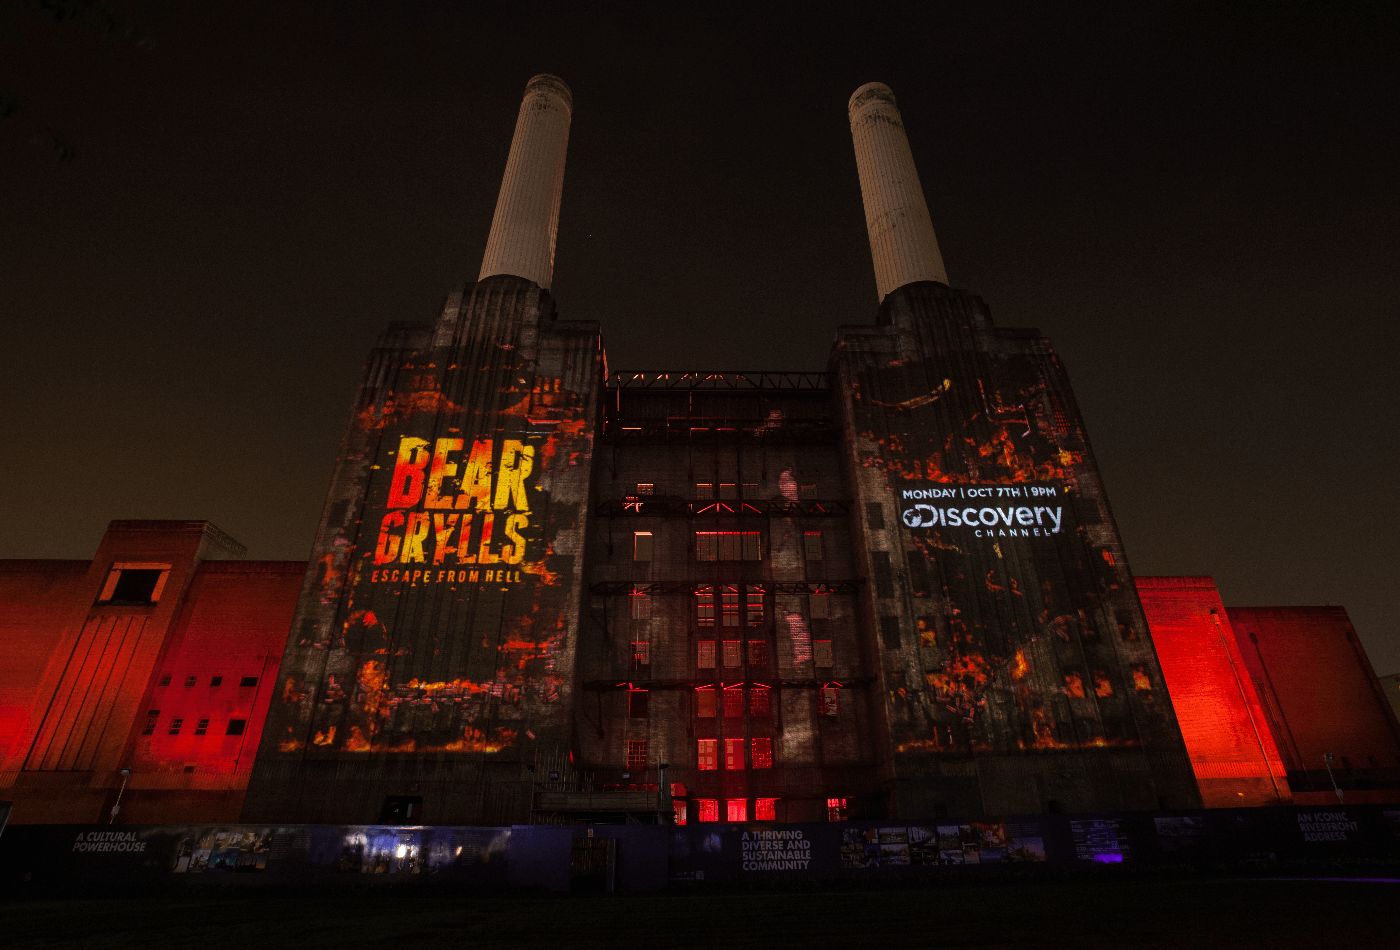 Exterior shot, lit up in red with advertising projected onto building.jpg